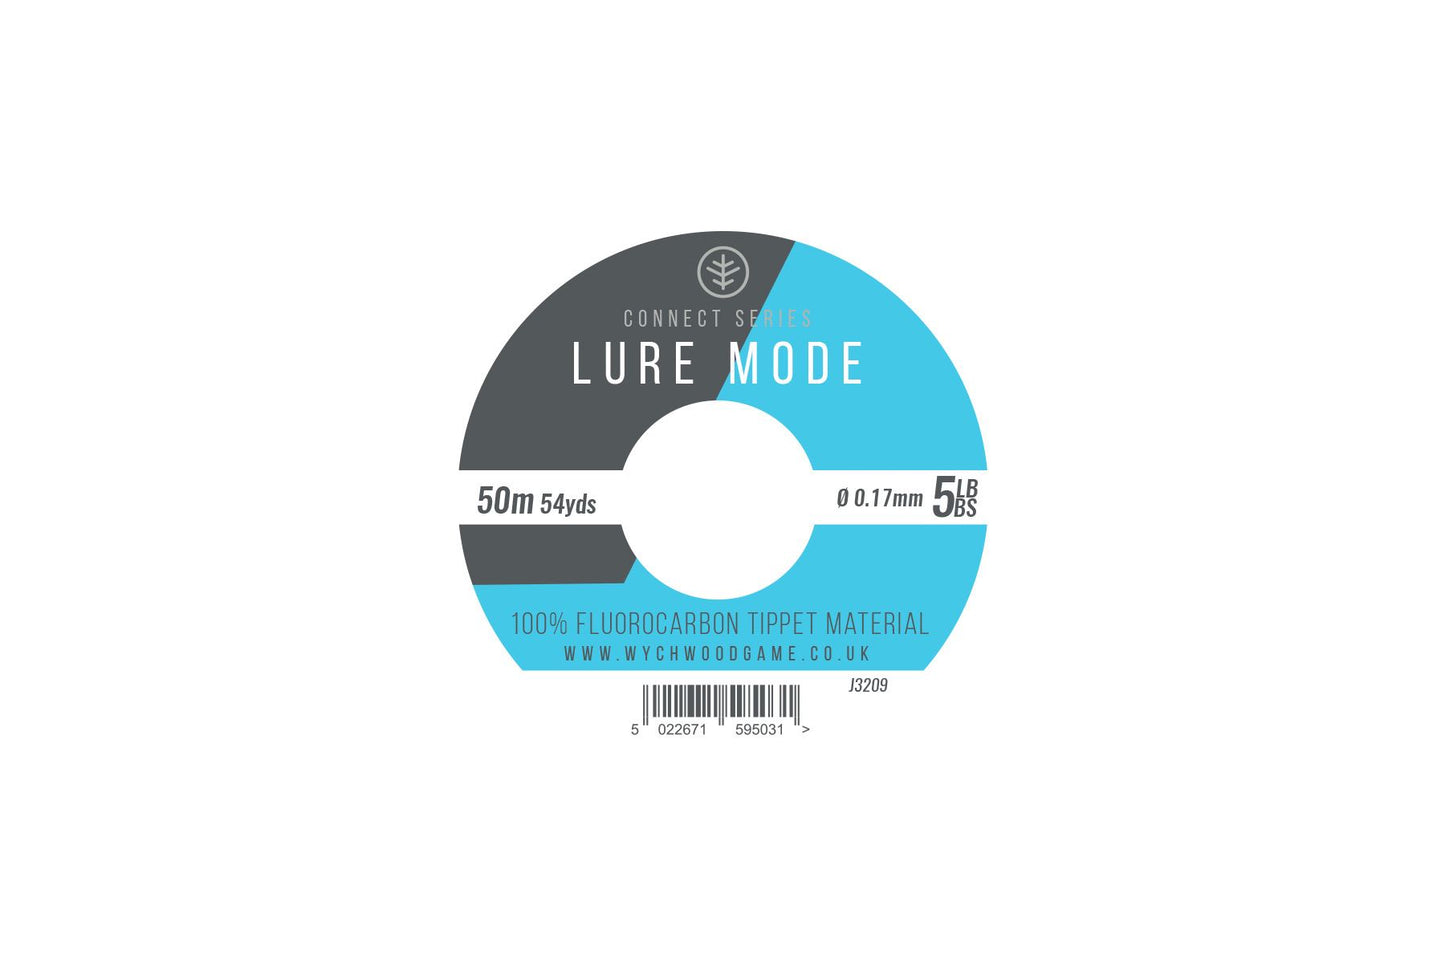 Wychwood Lure Mode Fluorocarbon 50m Tippet 5lb